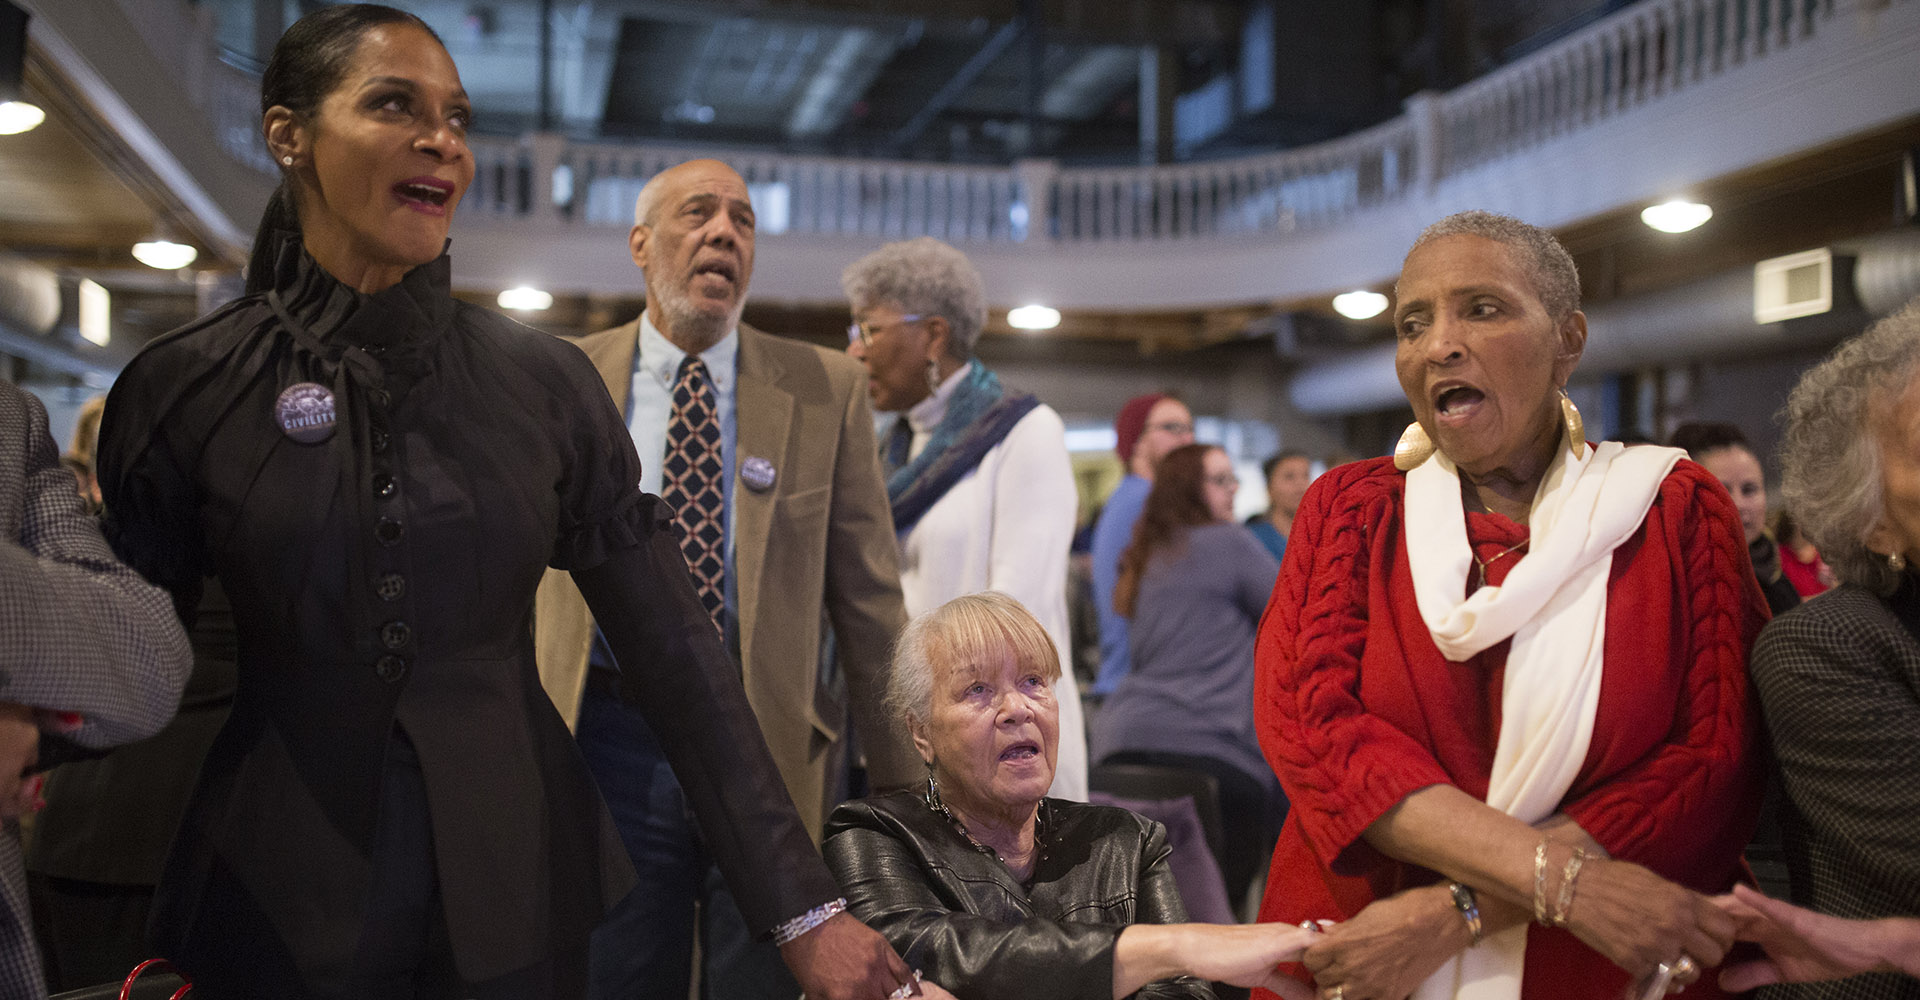 Photo of people interacting at the MLK breakfast